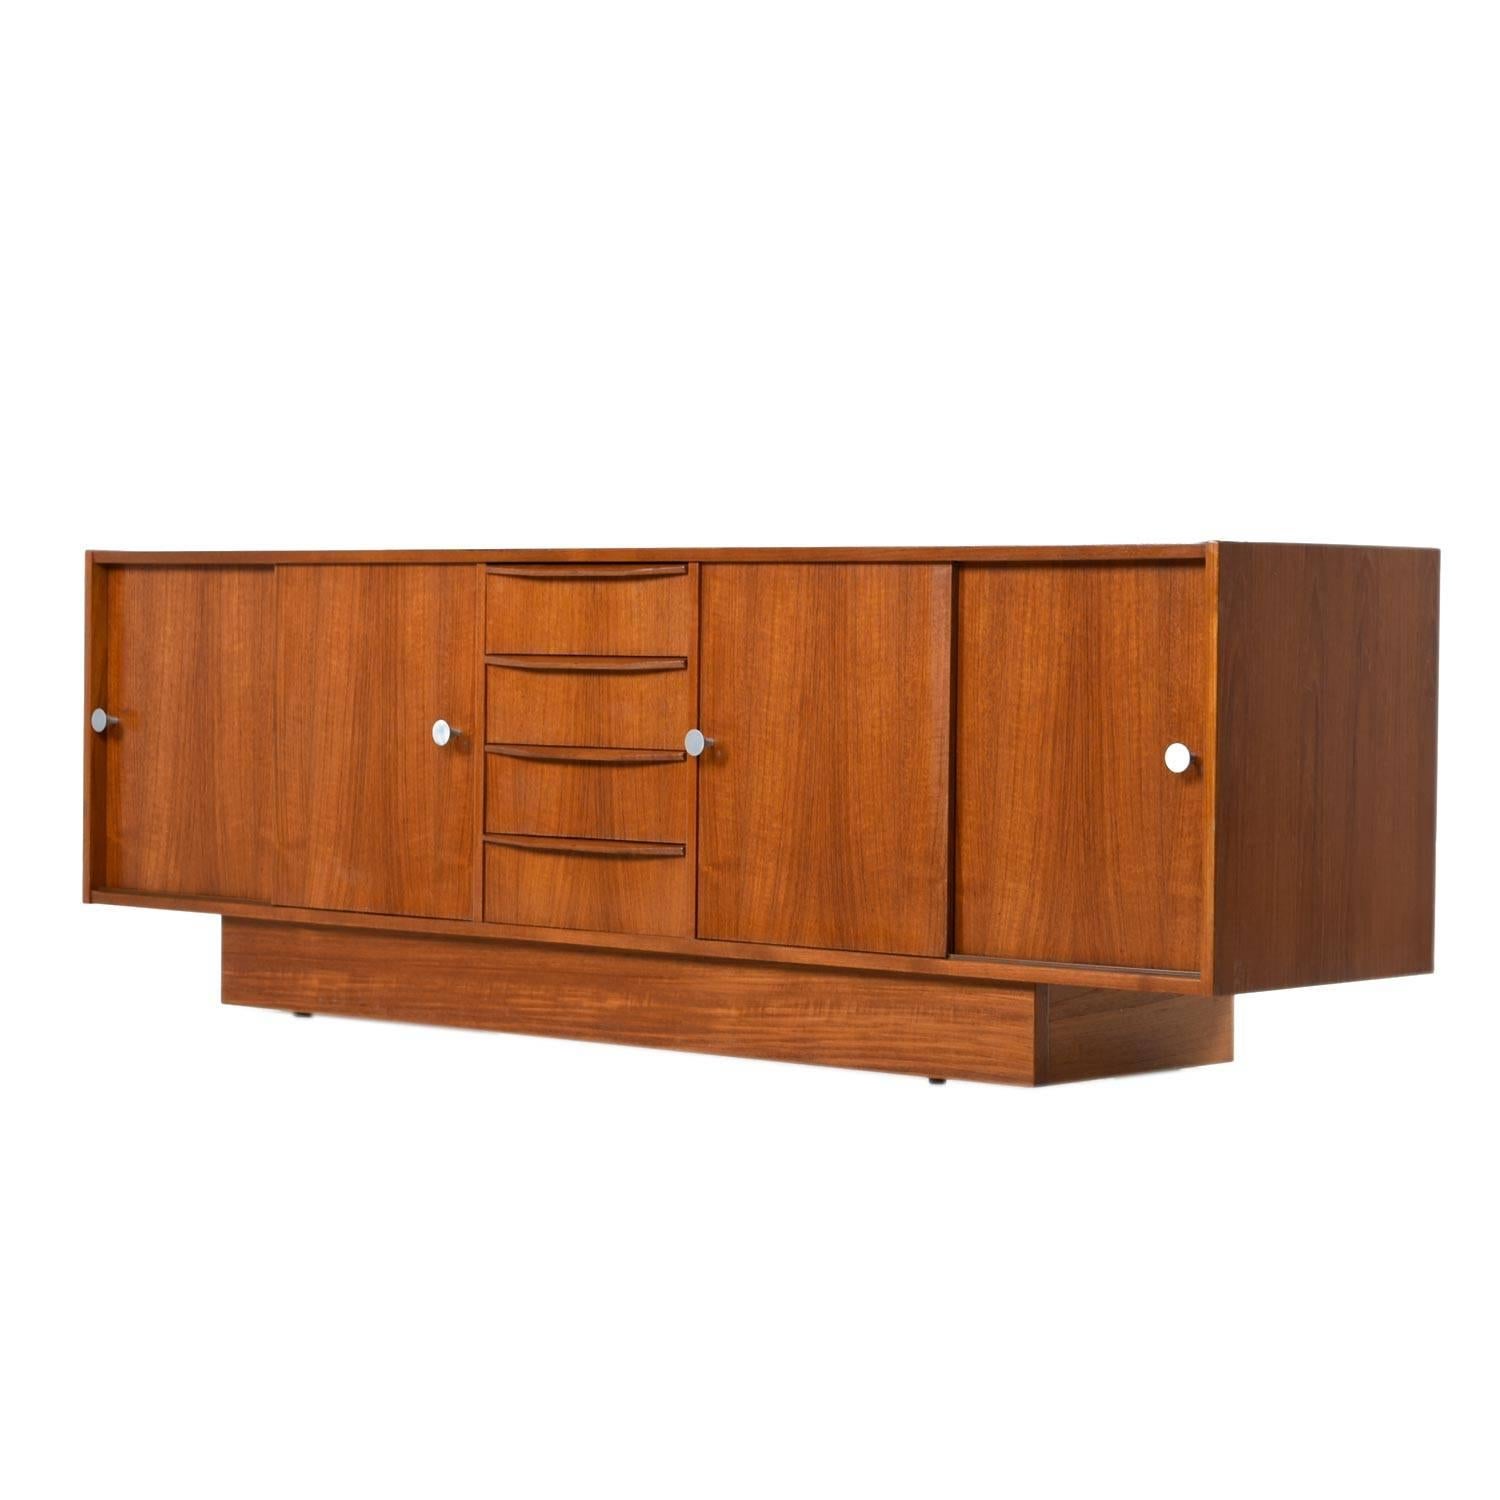 Expertly crafted vintage Danish teak credenza. The unit features convenient sliding doors that conceal cabinet space at left and right. An uncommon mix of drawers and cabinet space make this piece versatile. Use it as a dresser in the bedroom, TV